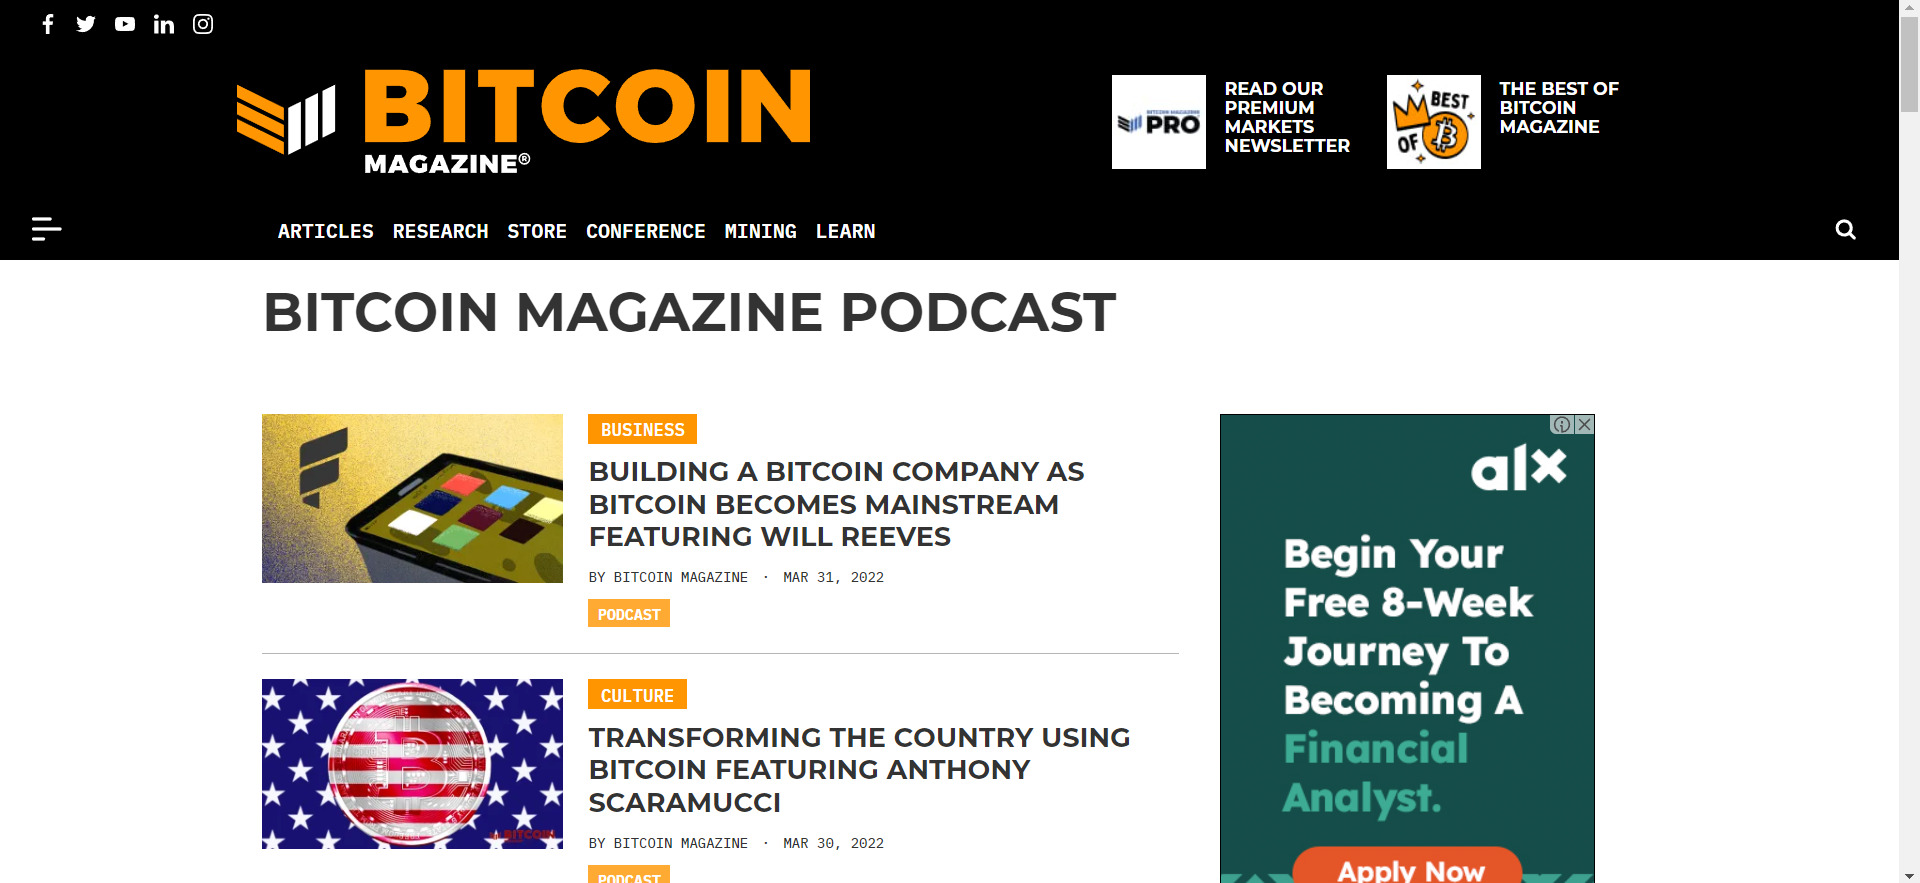 Top 10 Crypto Podcast that Every Investor Should Tune In | Dailycoin.com